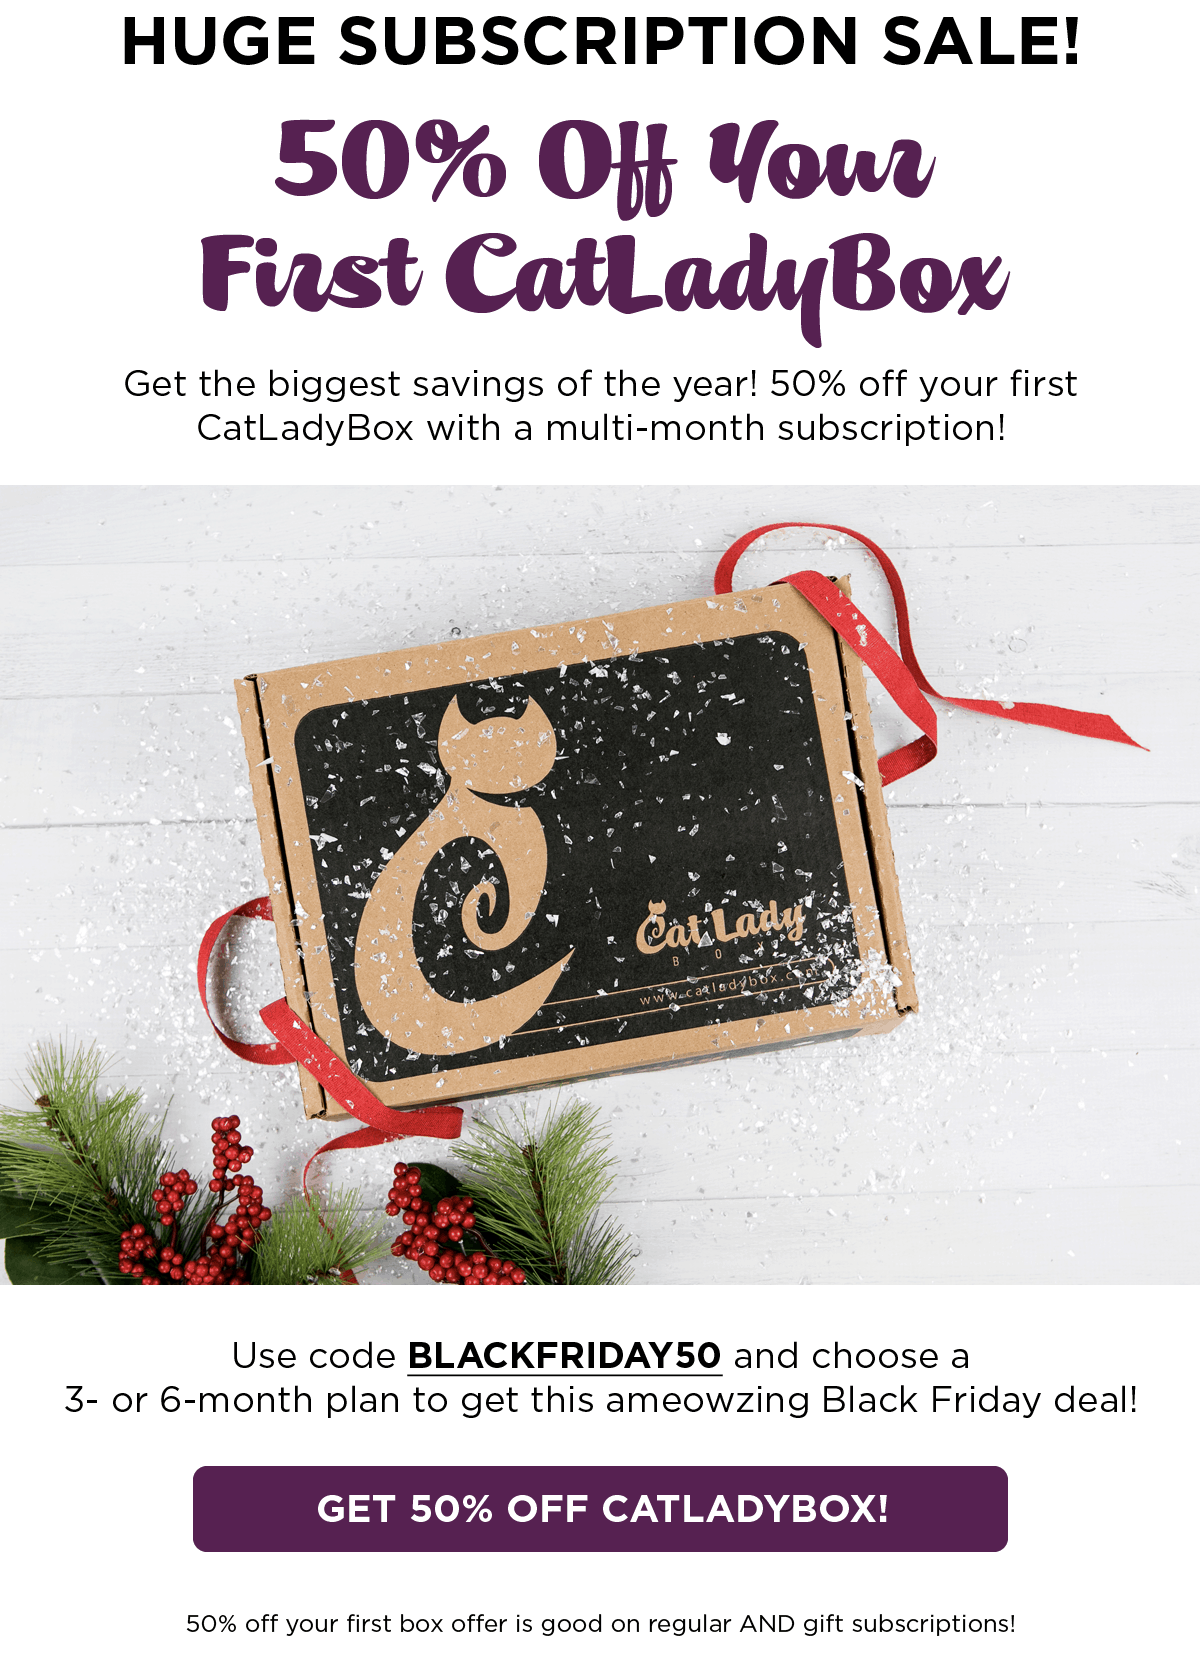 Cat Lady Box Black Friday Deals 50 Off First Box! Hello Subscription